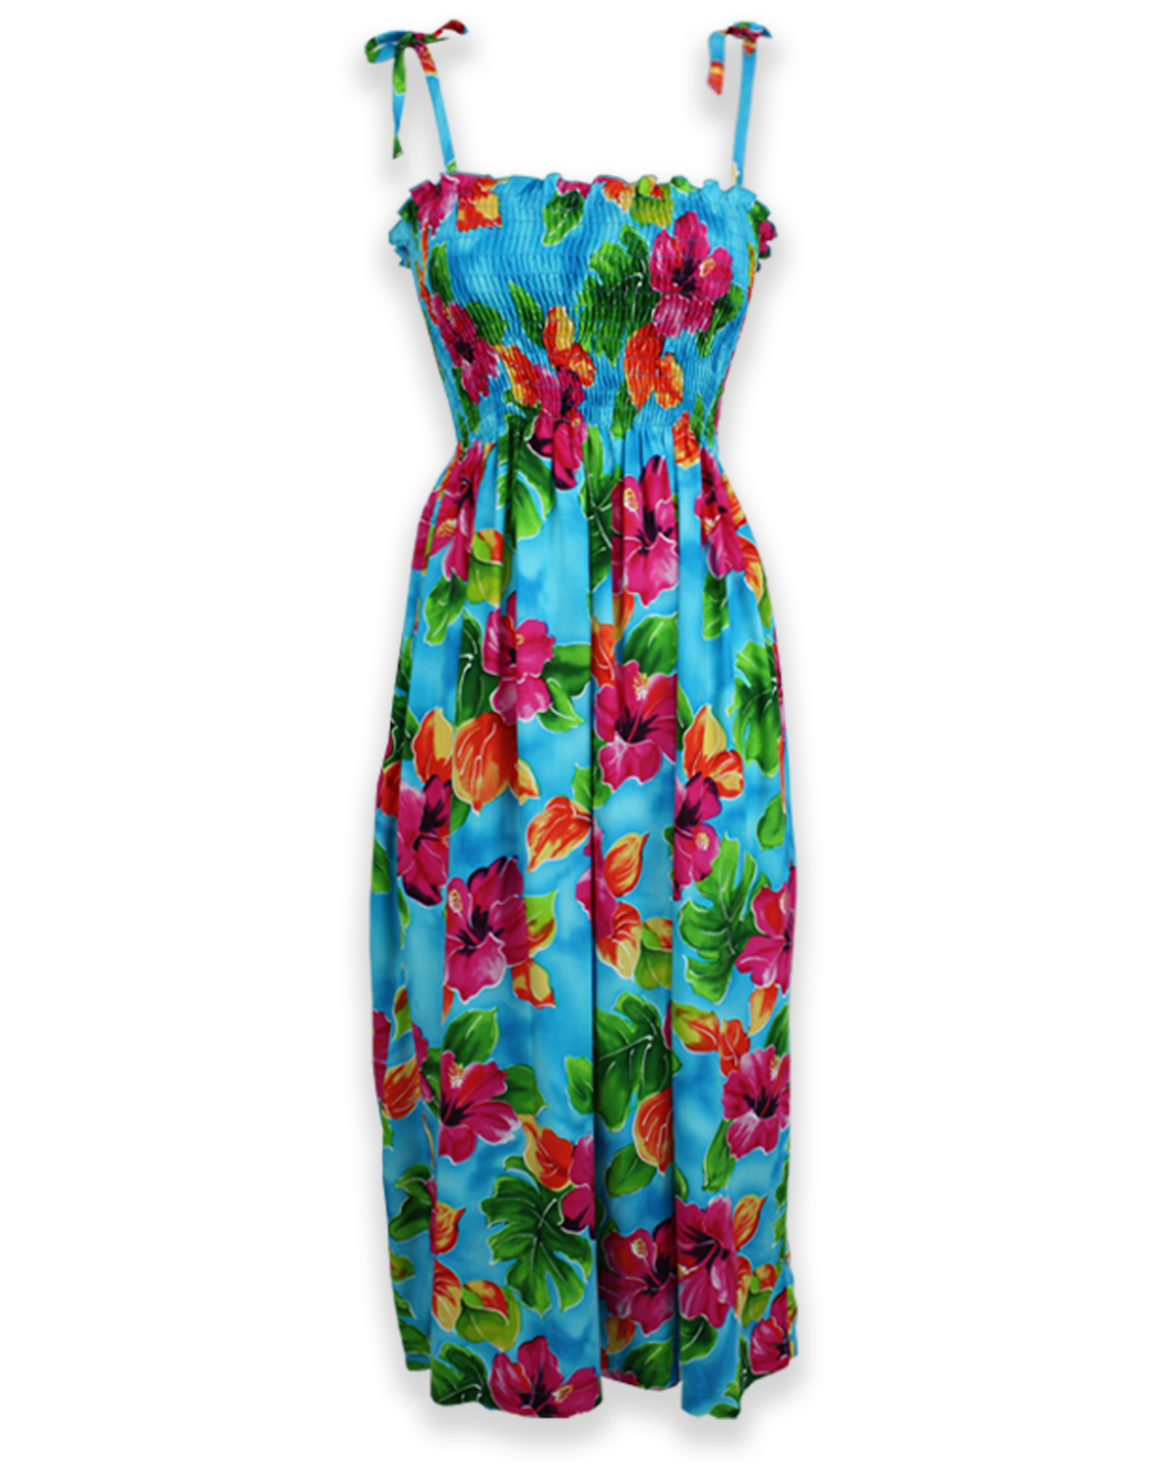 Shirred Tube Top Sundress - Hibiscus Watercolor - Turquoise